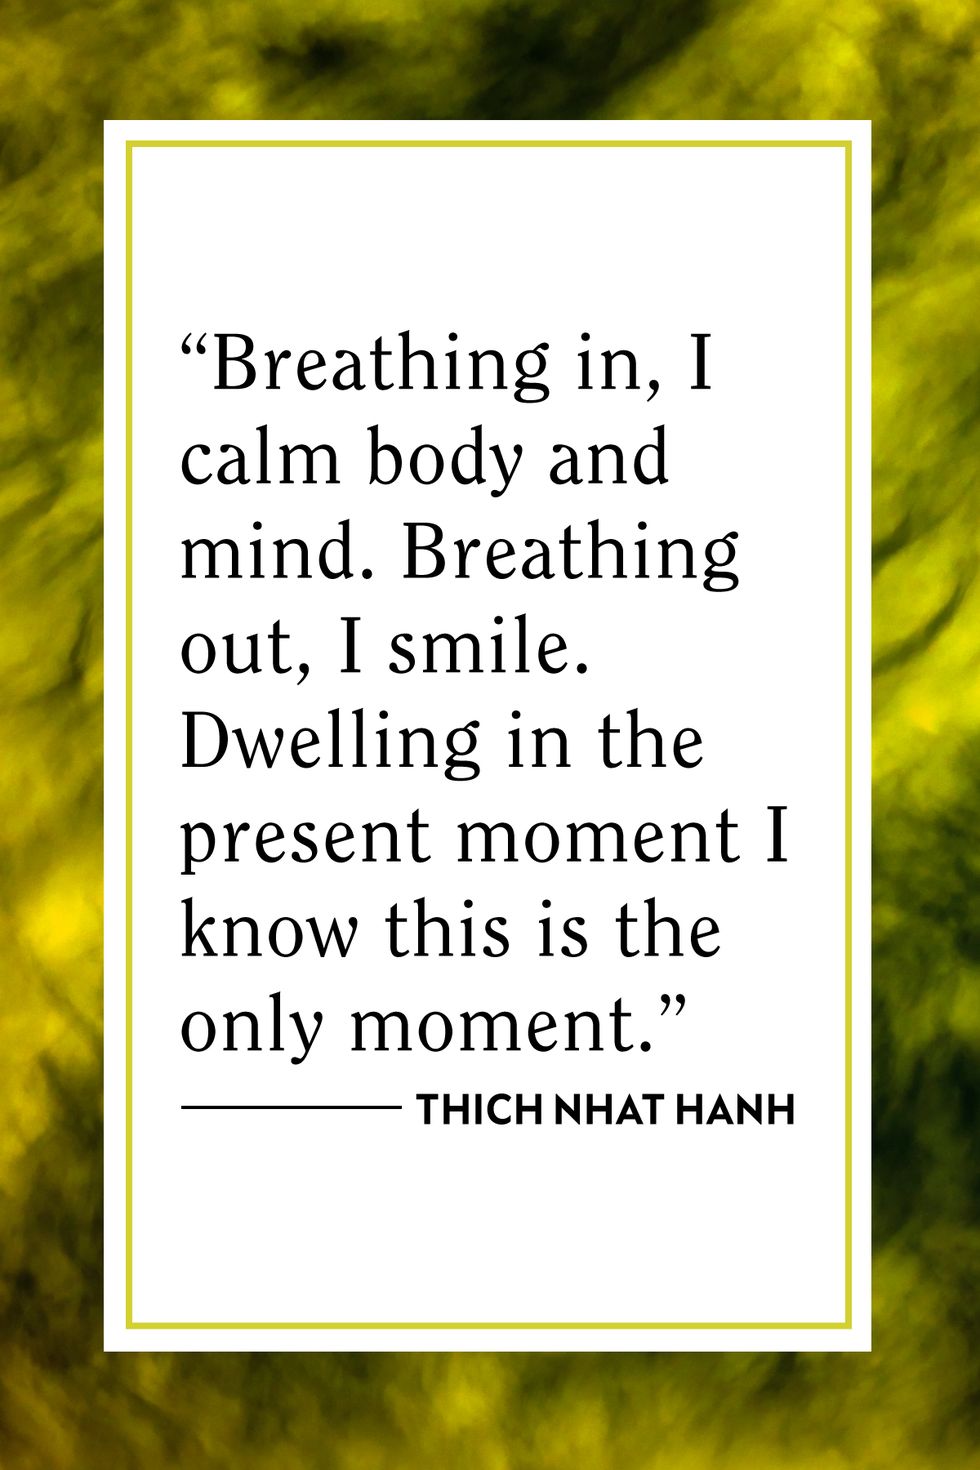 4 Thich Nhat Hanh Quotes On The Power Of Breath - #breathe #quote